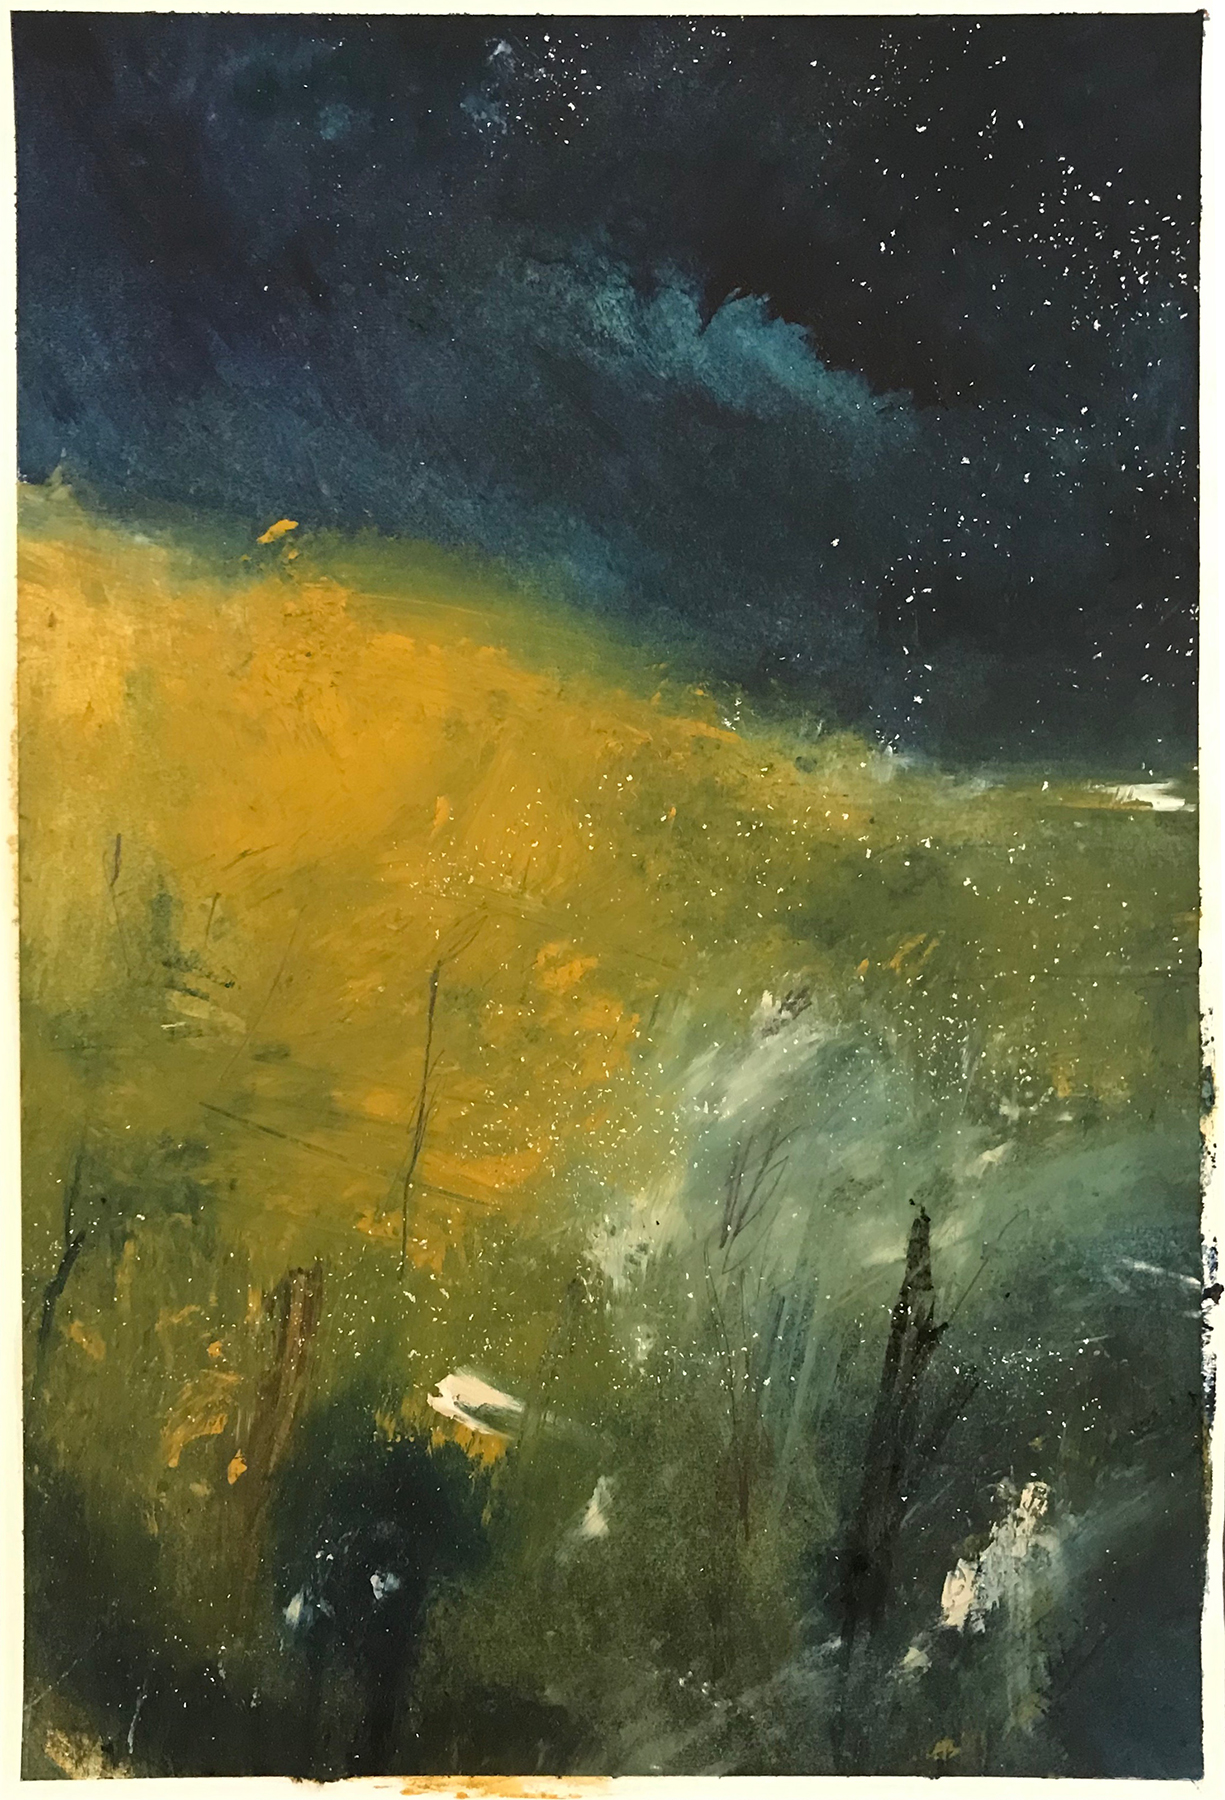 “...pollen drifts and summer storms 12:06” (oil, pencil, charcoal and chalk on paper 41x28cm) Artwork for sale £400 framed